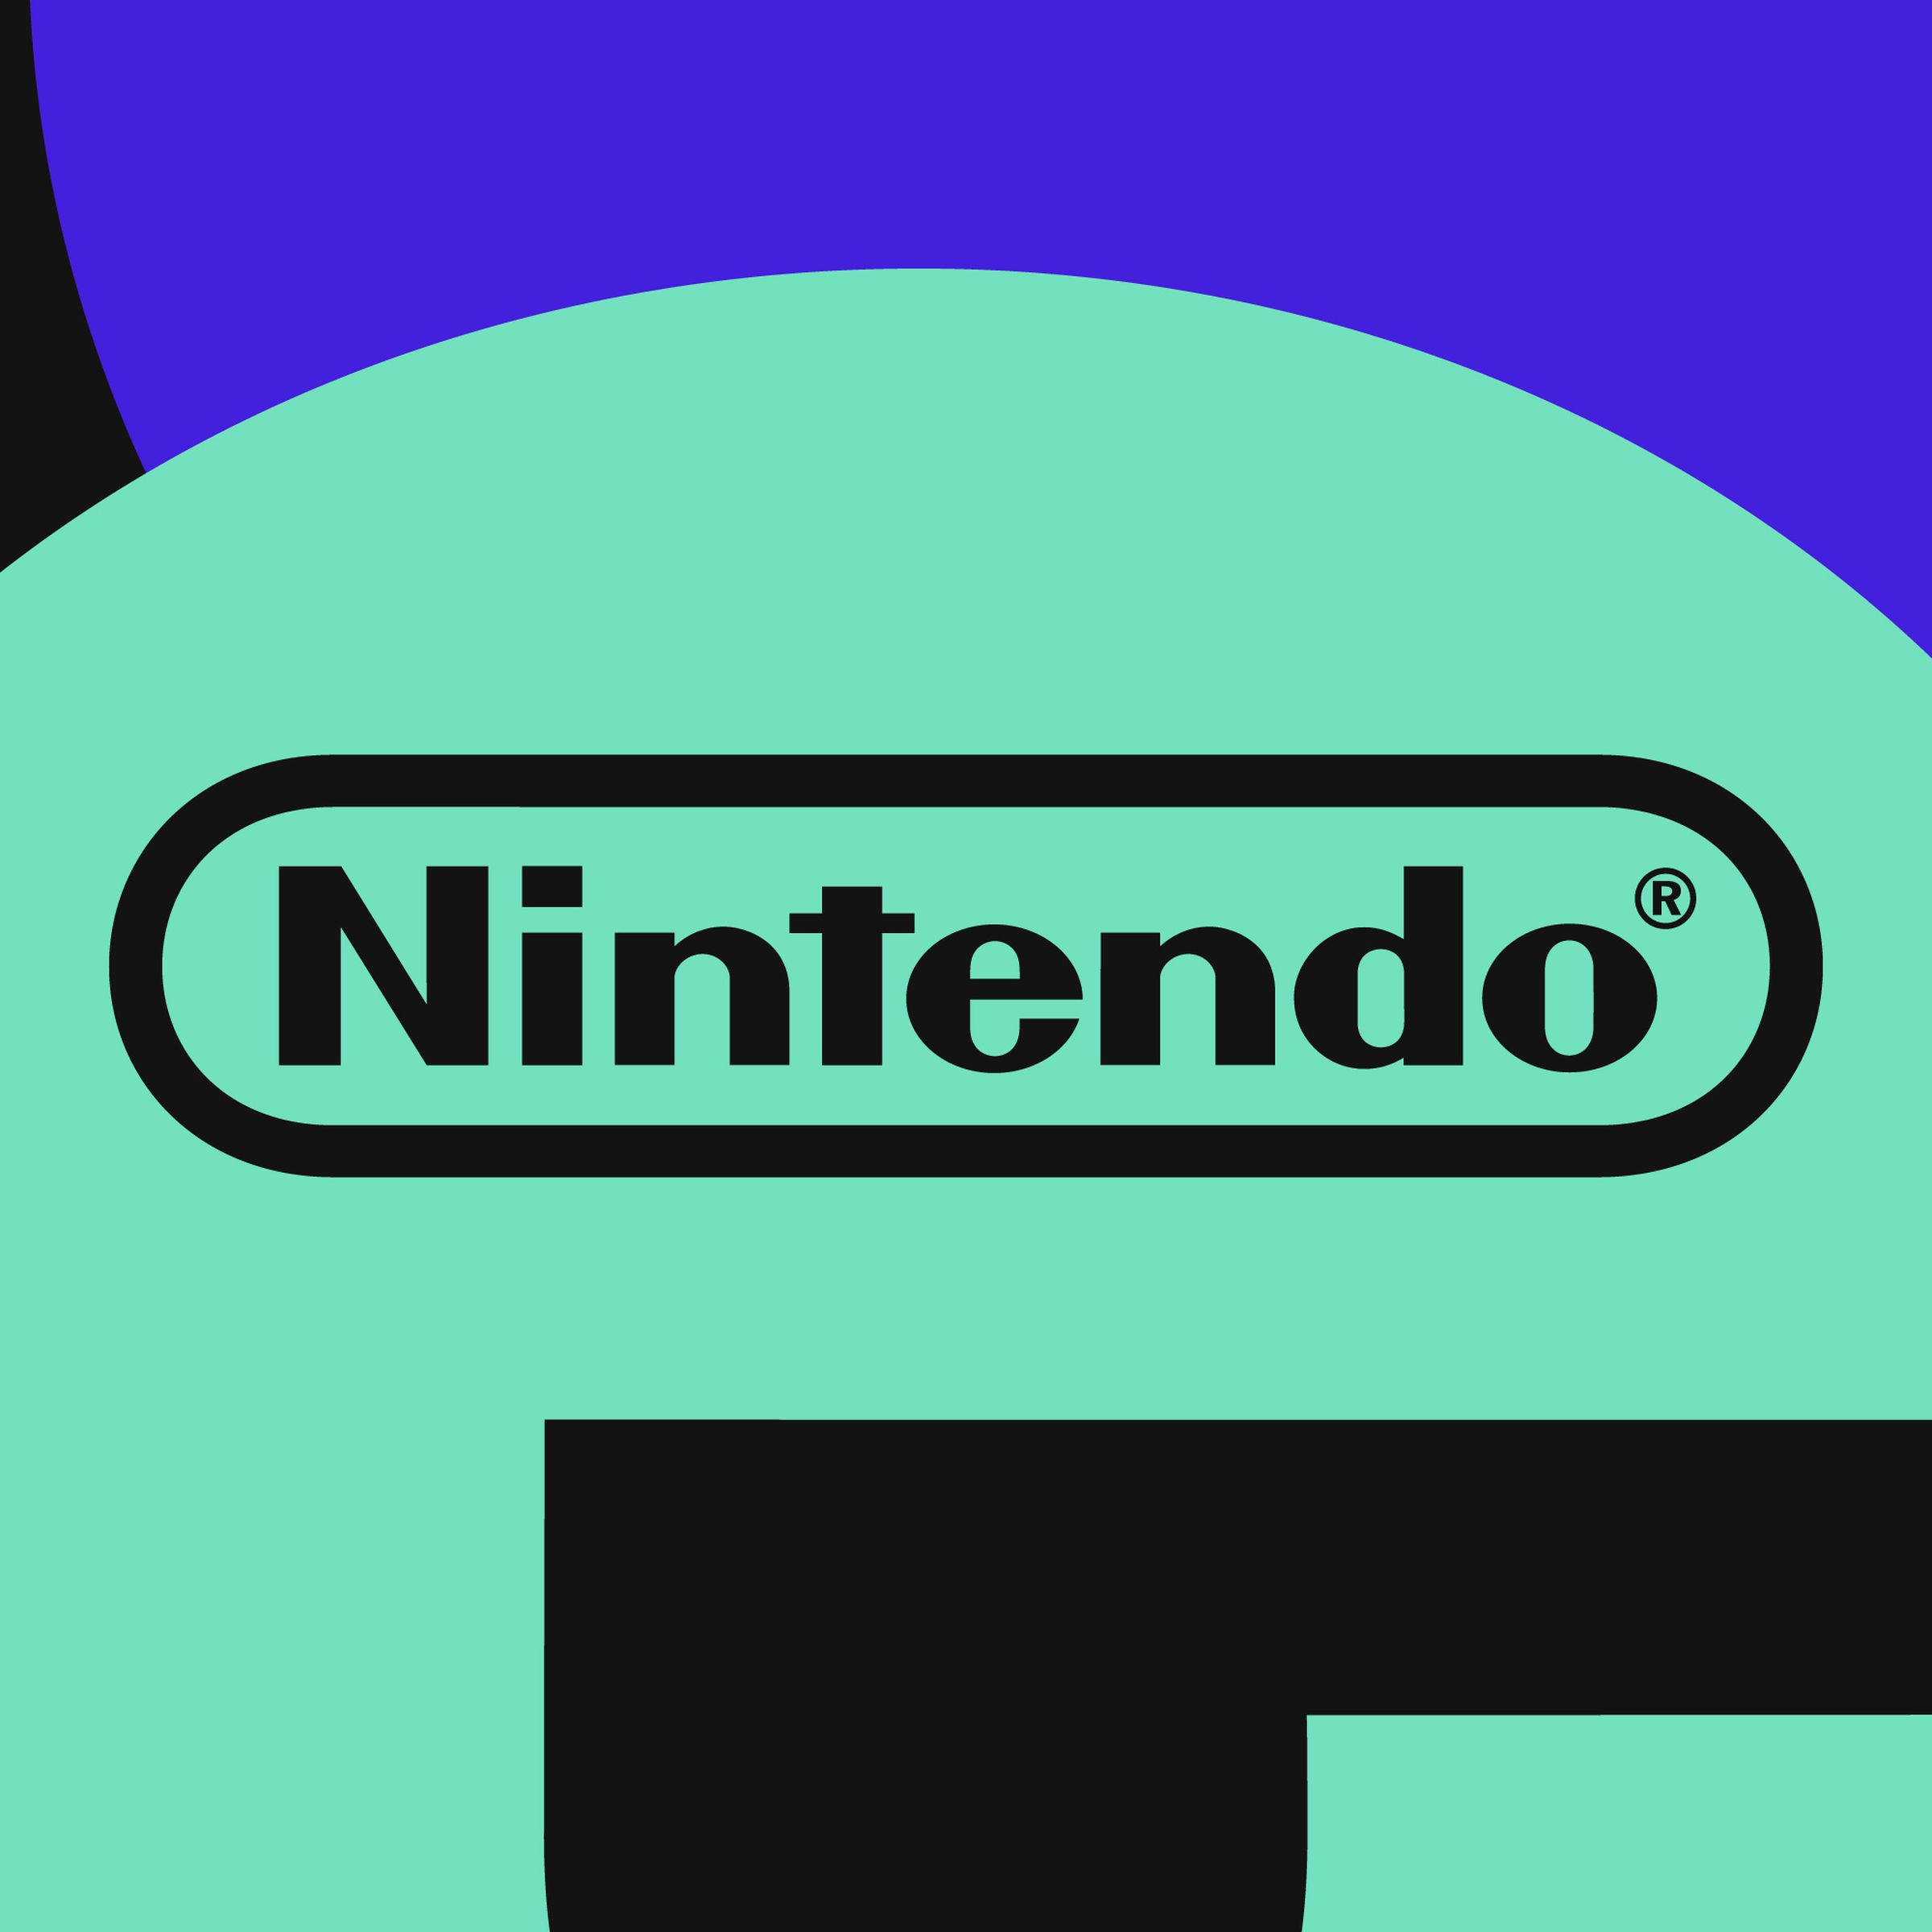 Nintendo’s logo in a green circle with black and purple shapes around it